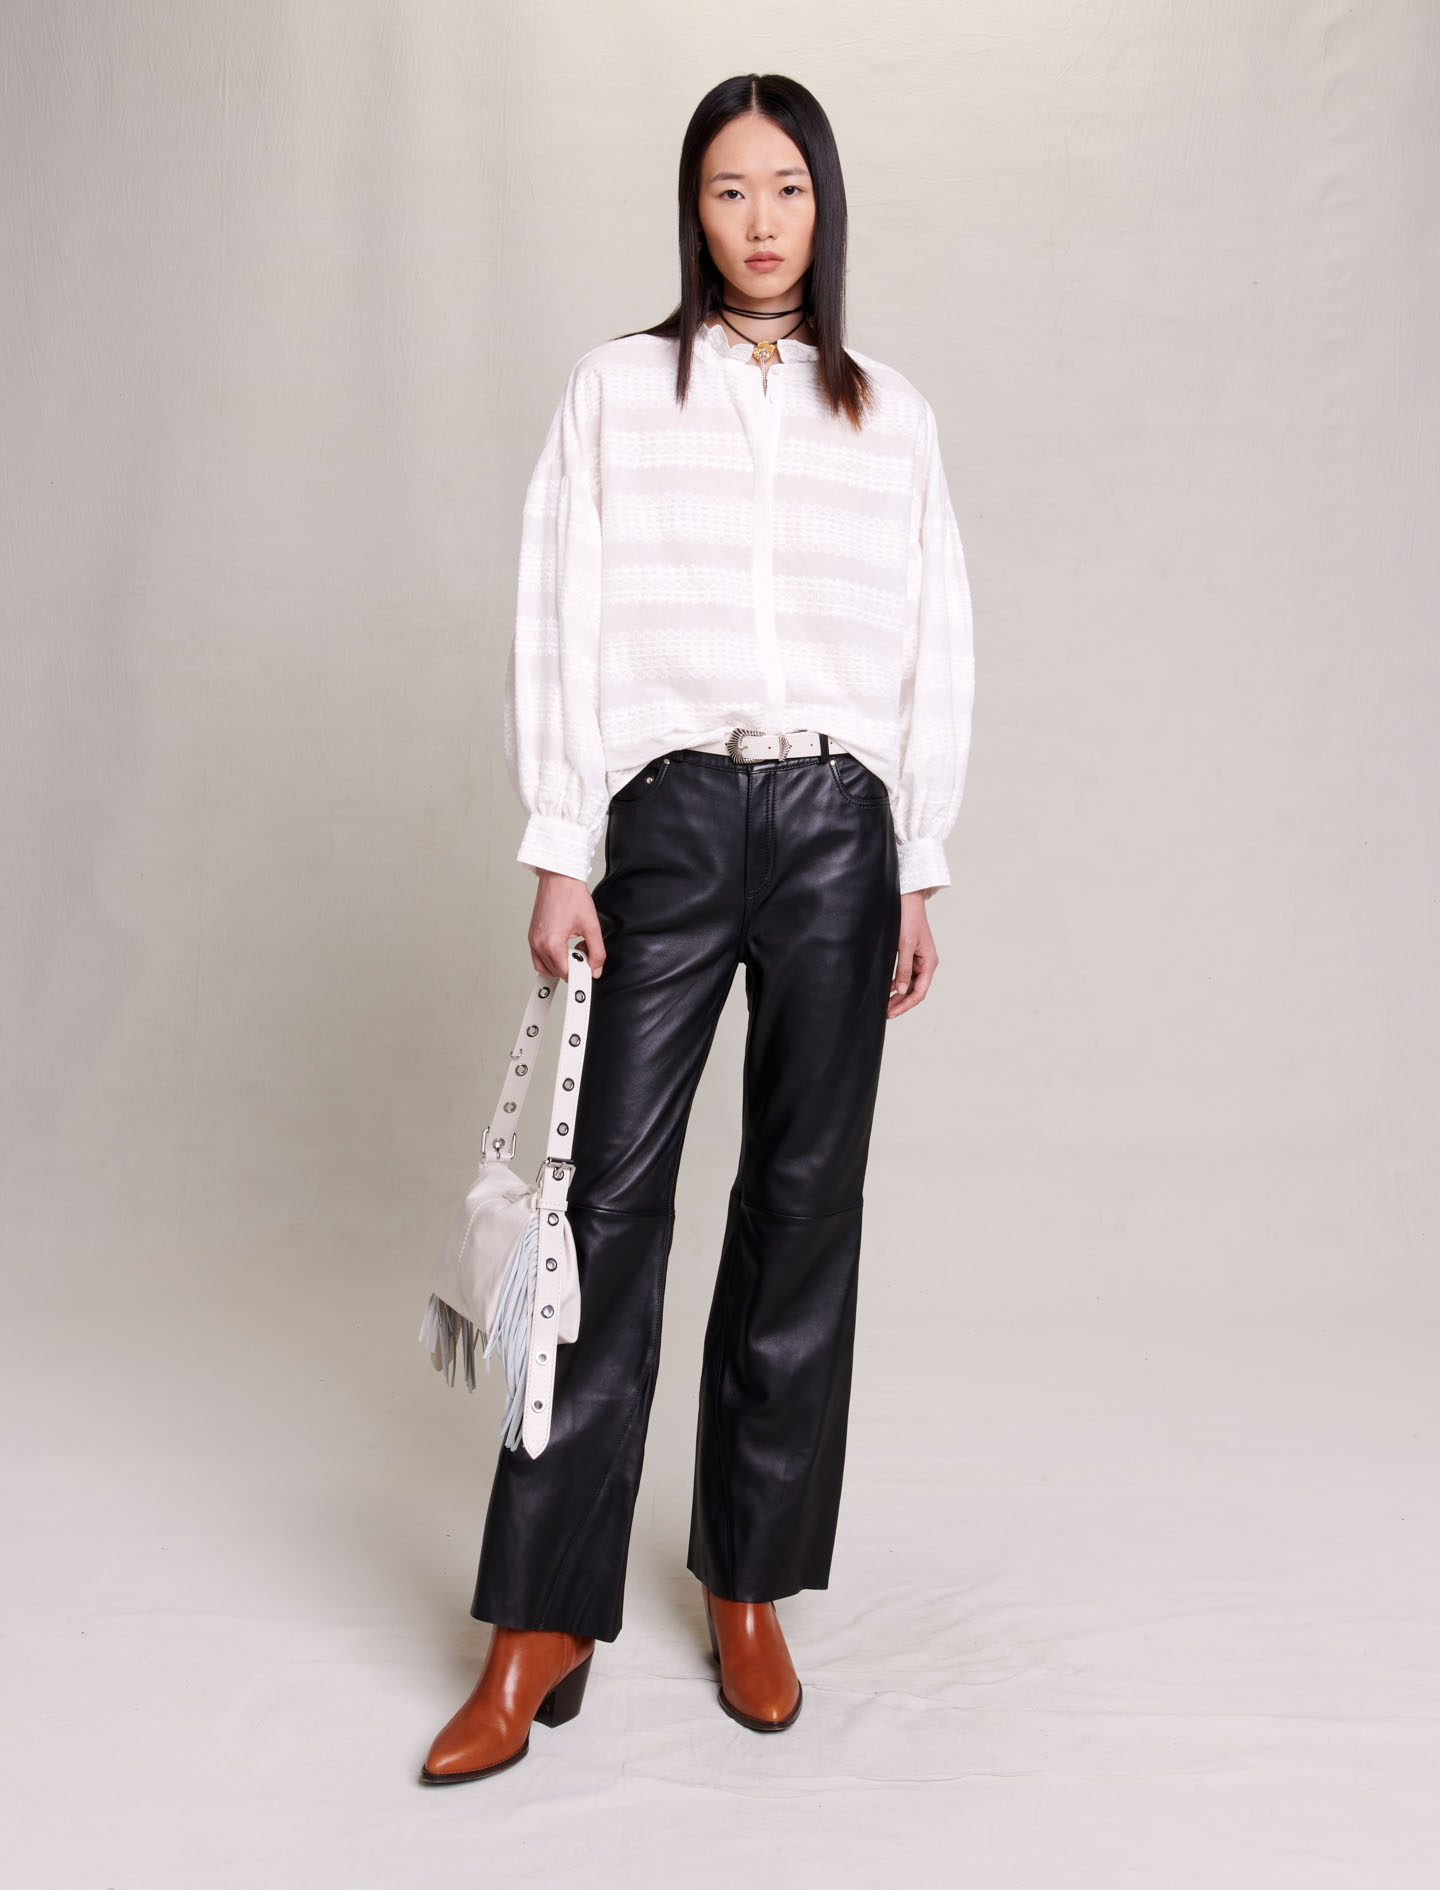 Maje Woman's cotton Embroidery: Embroidered ruffled shirt for Fall/Winter, in color White / White